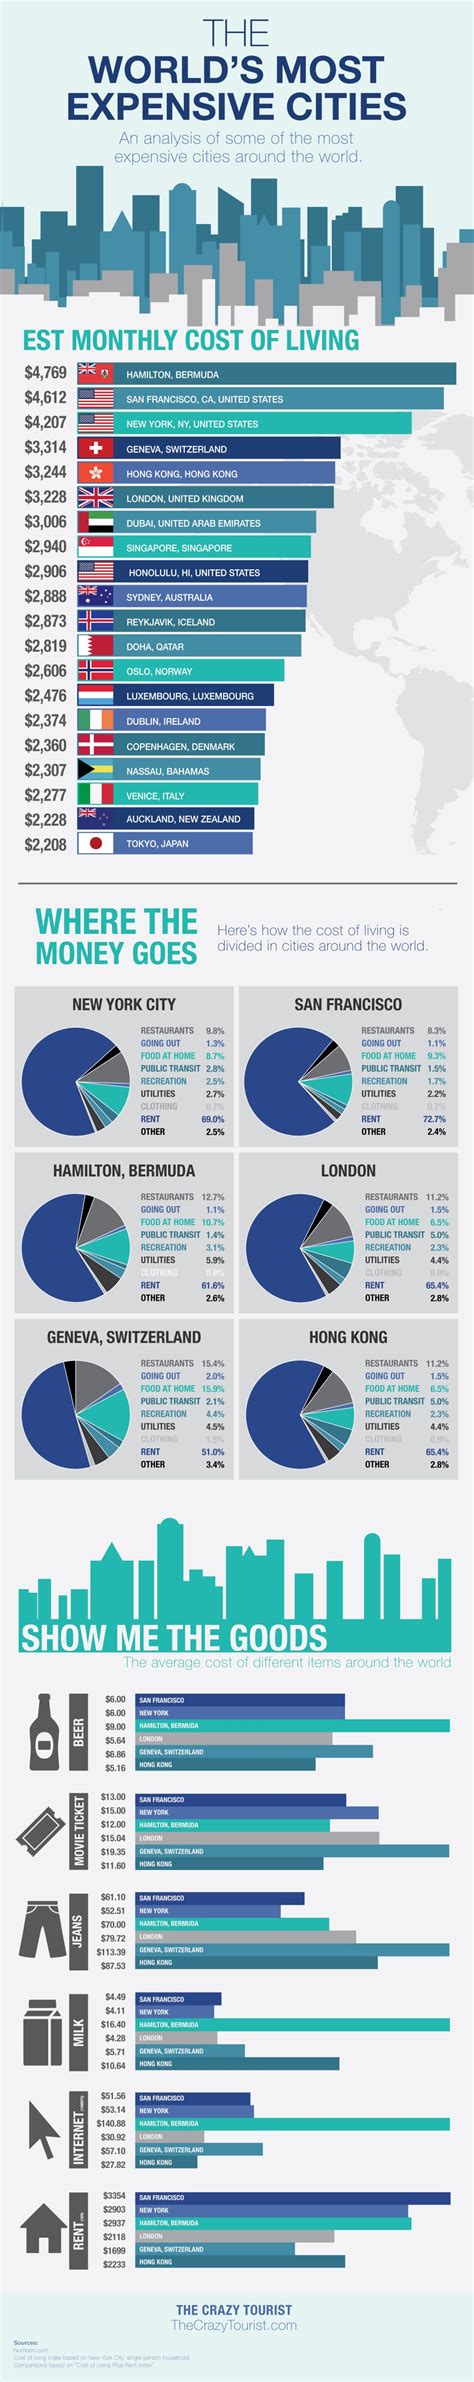 Top 20 Most Expensive Cities Of The World Infographic